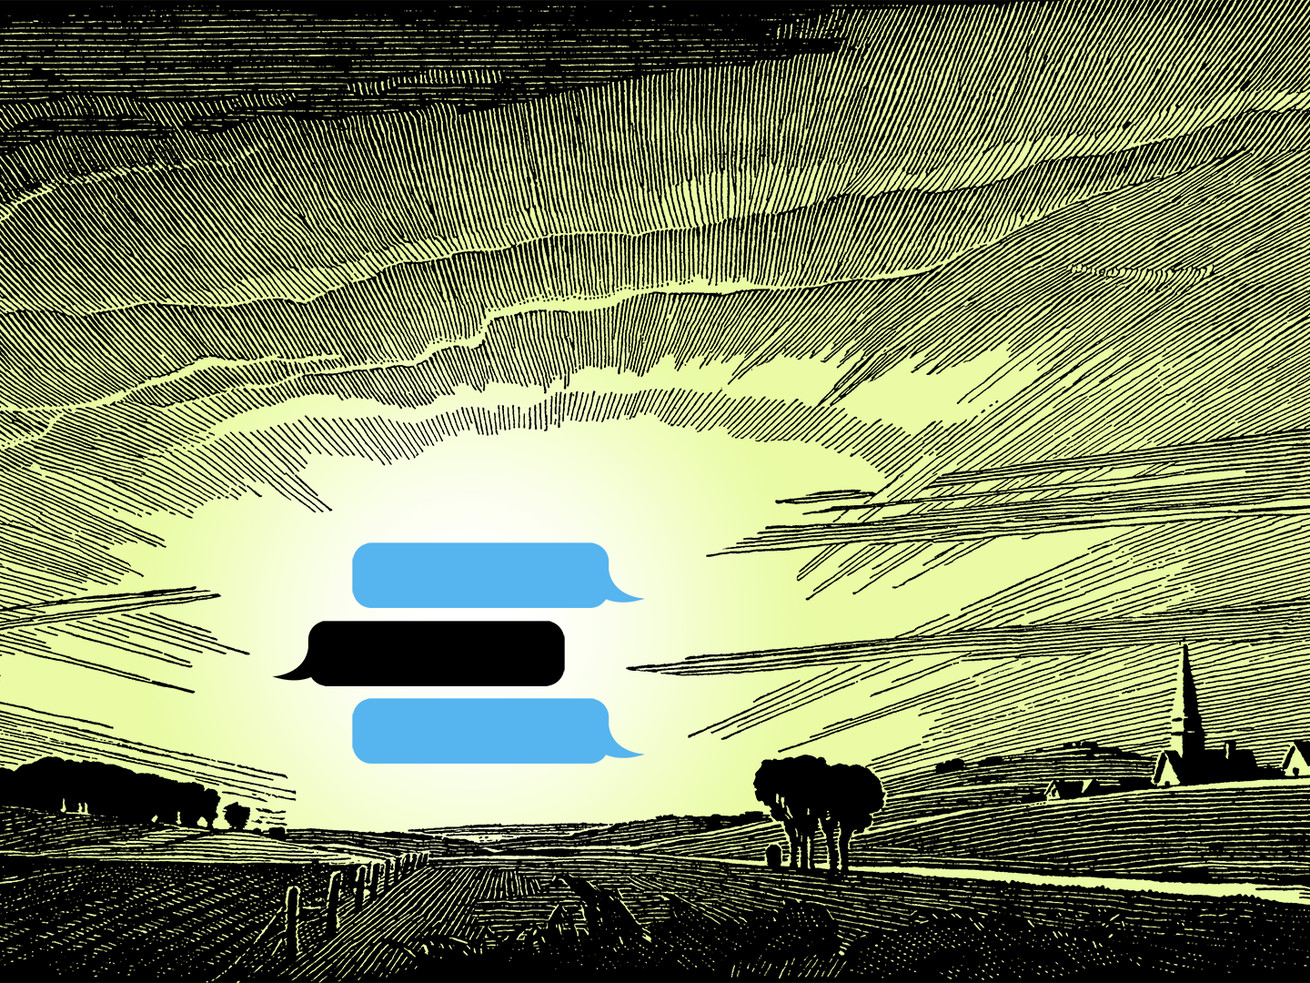 Three speech bubbles representing the OpenAI GPT chatbot store are floating above a horizon in an etched drawing of a countryside.